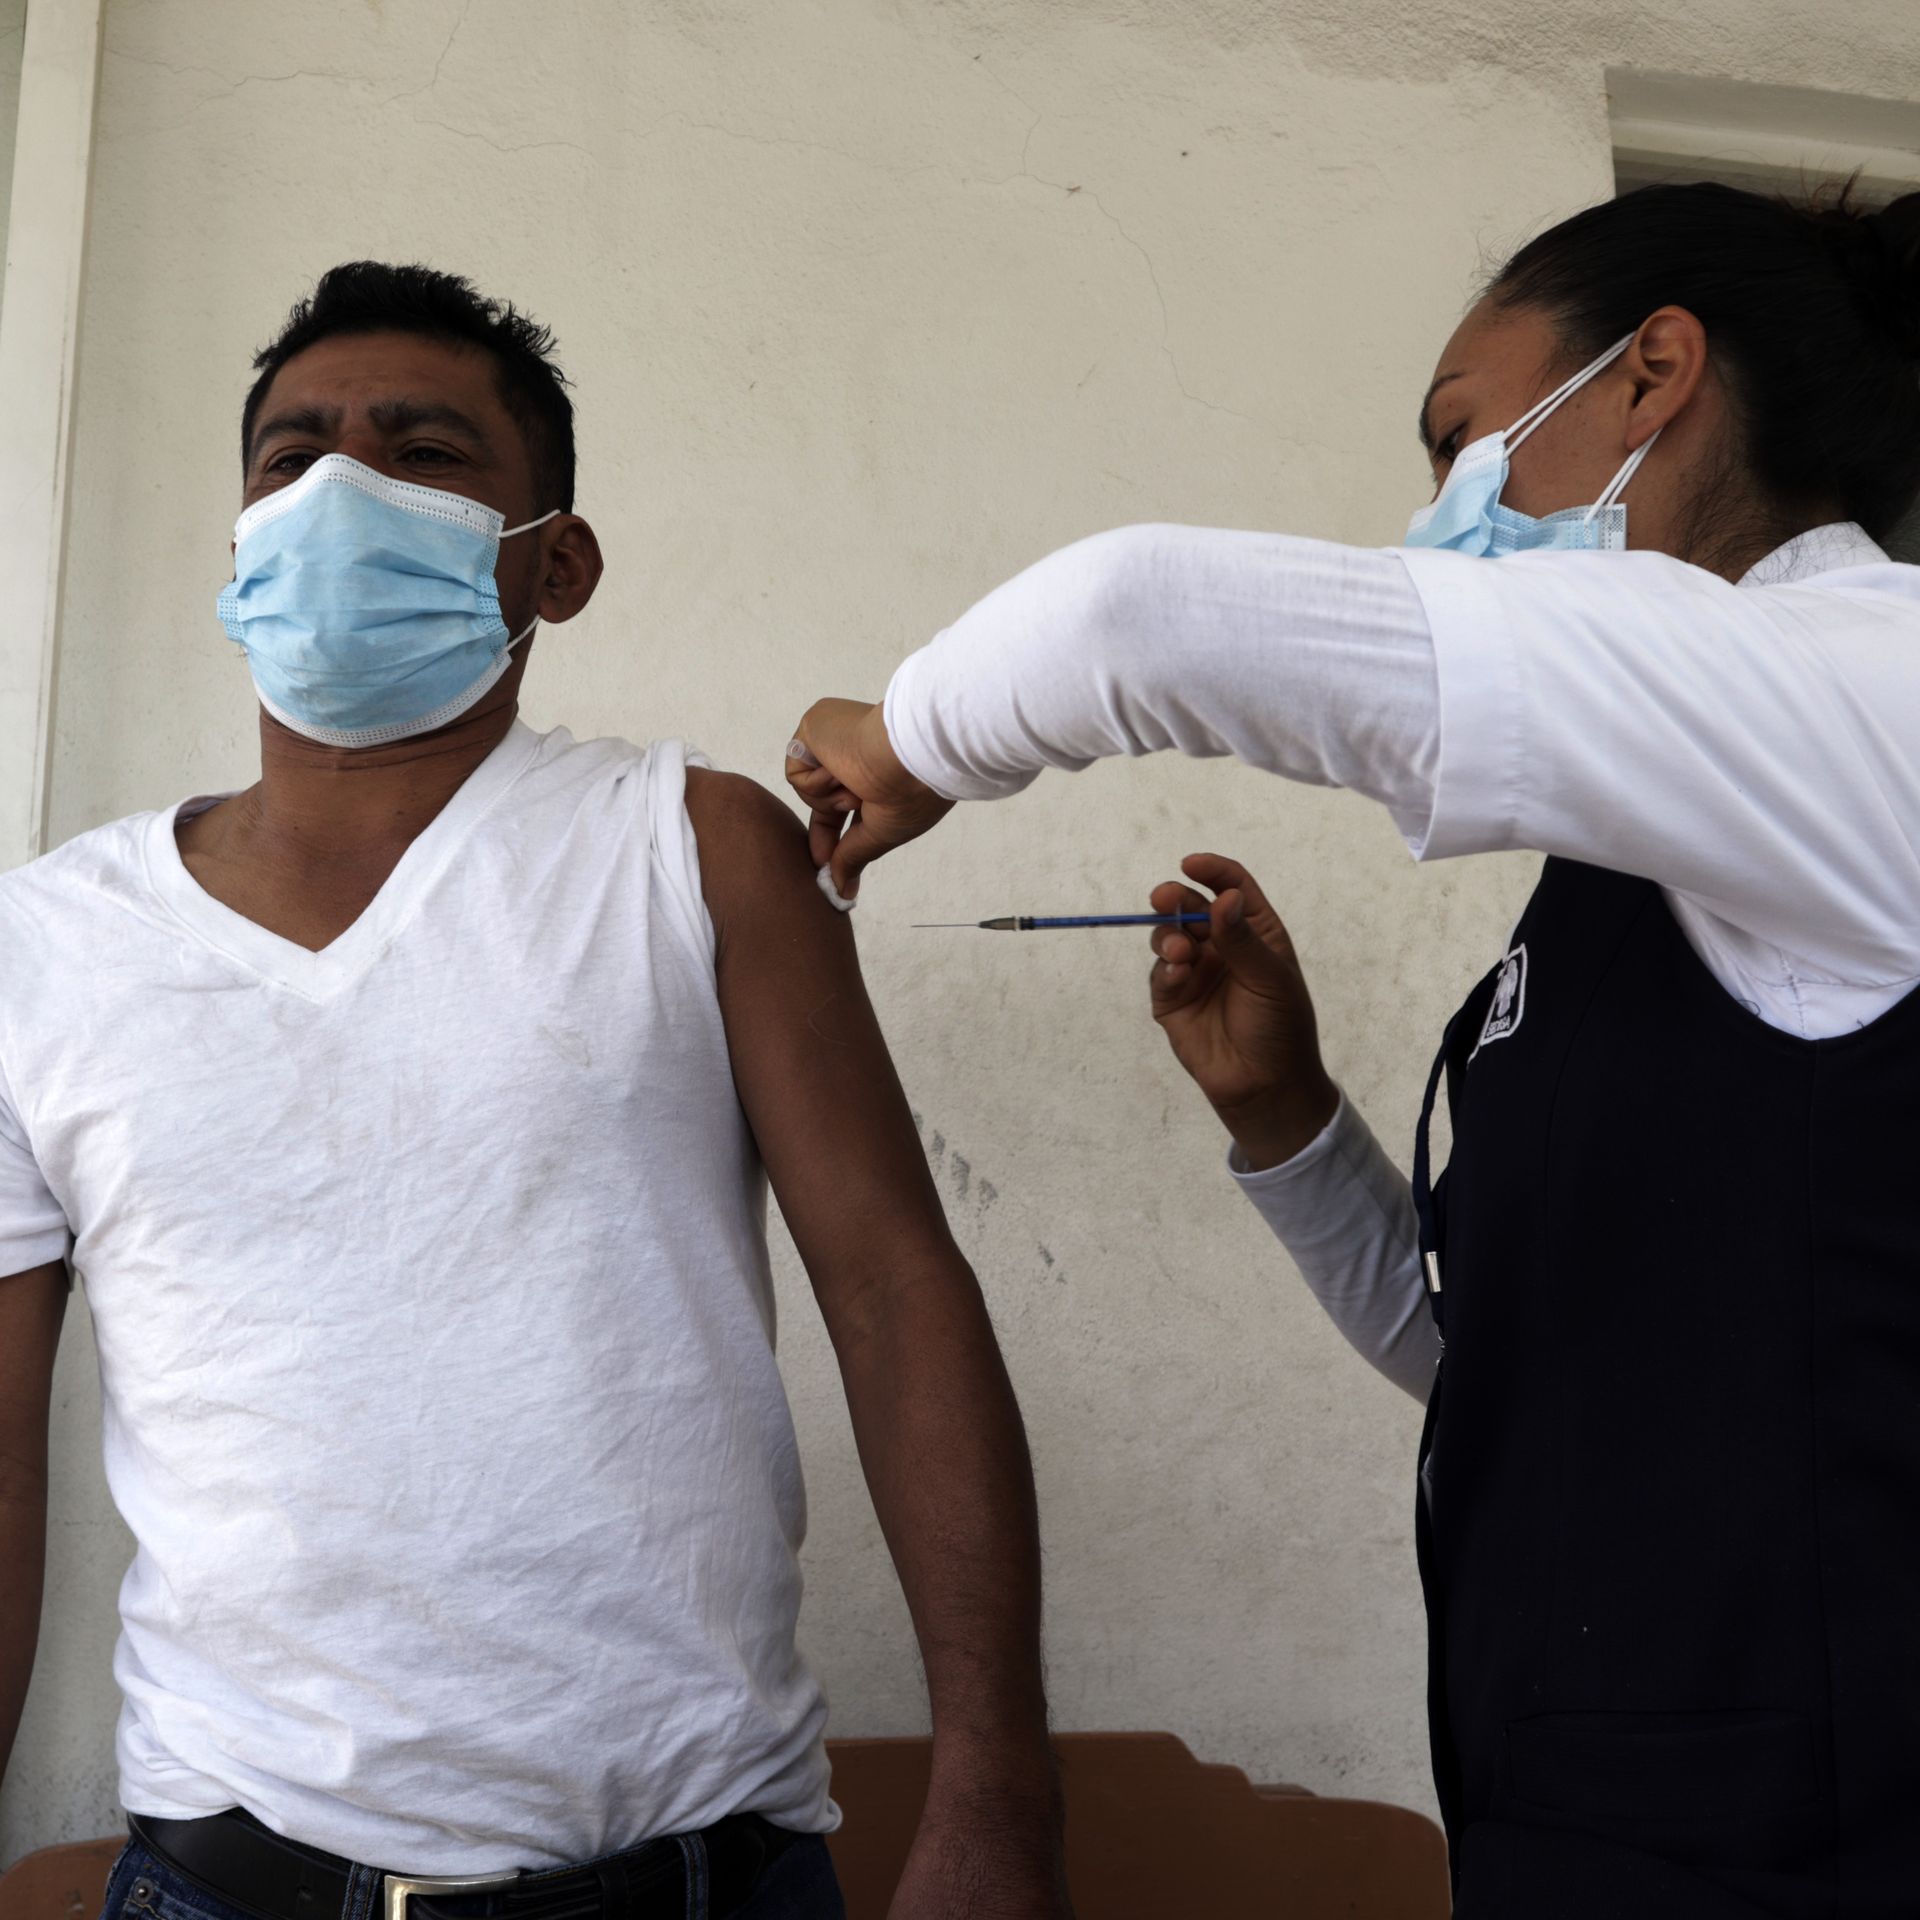 A migrant receives a vaccine dose in Mexico before continuing their journey to the U.S. border